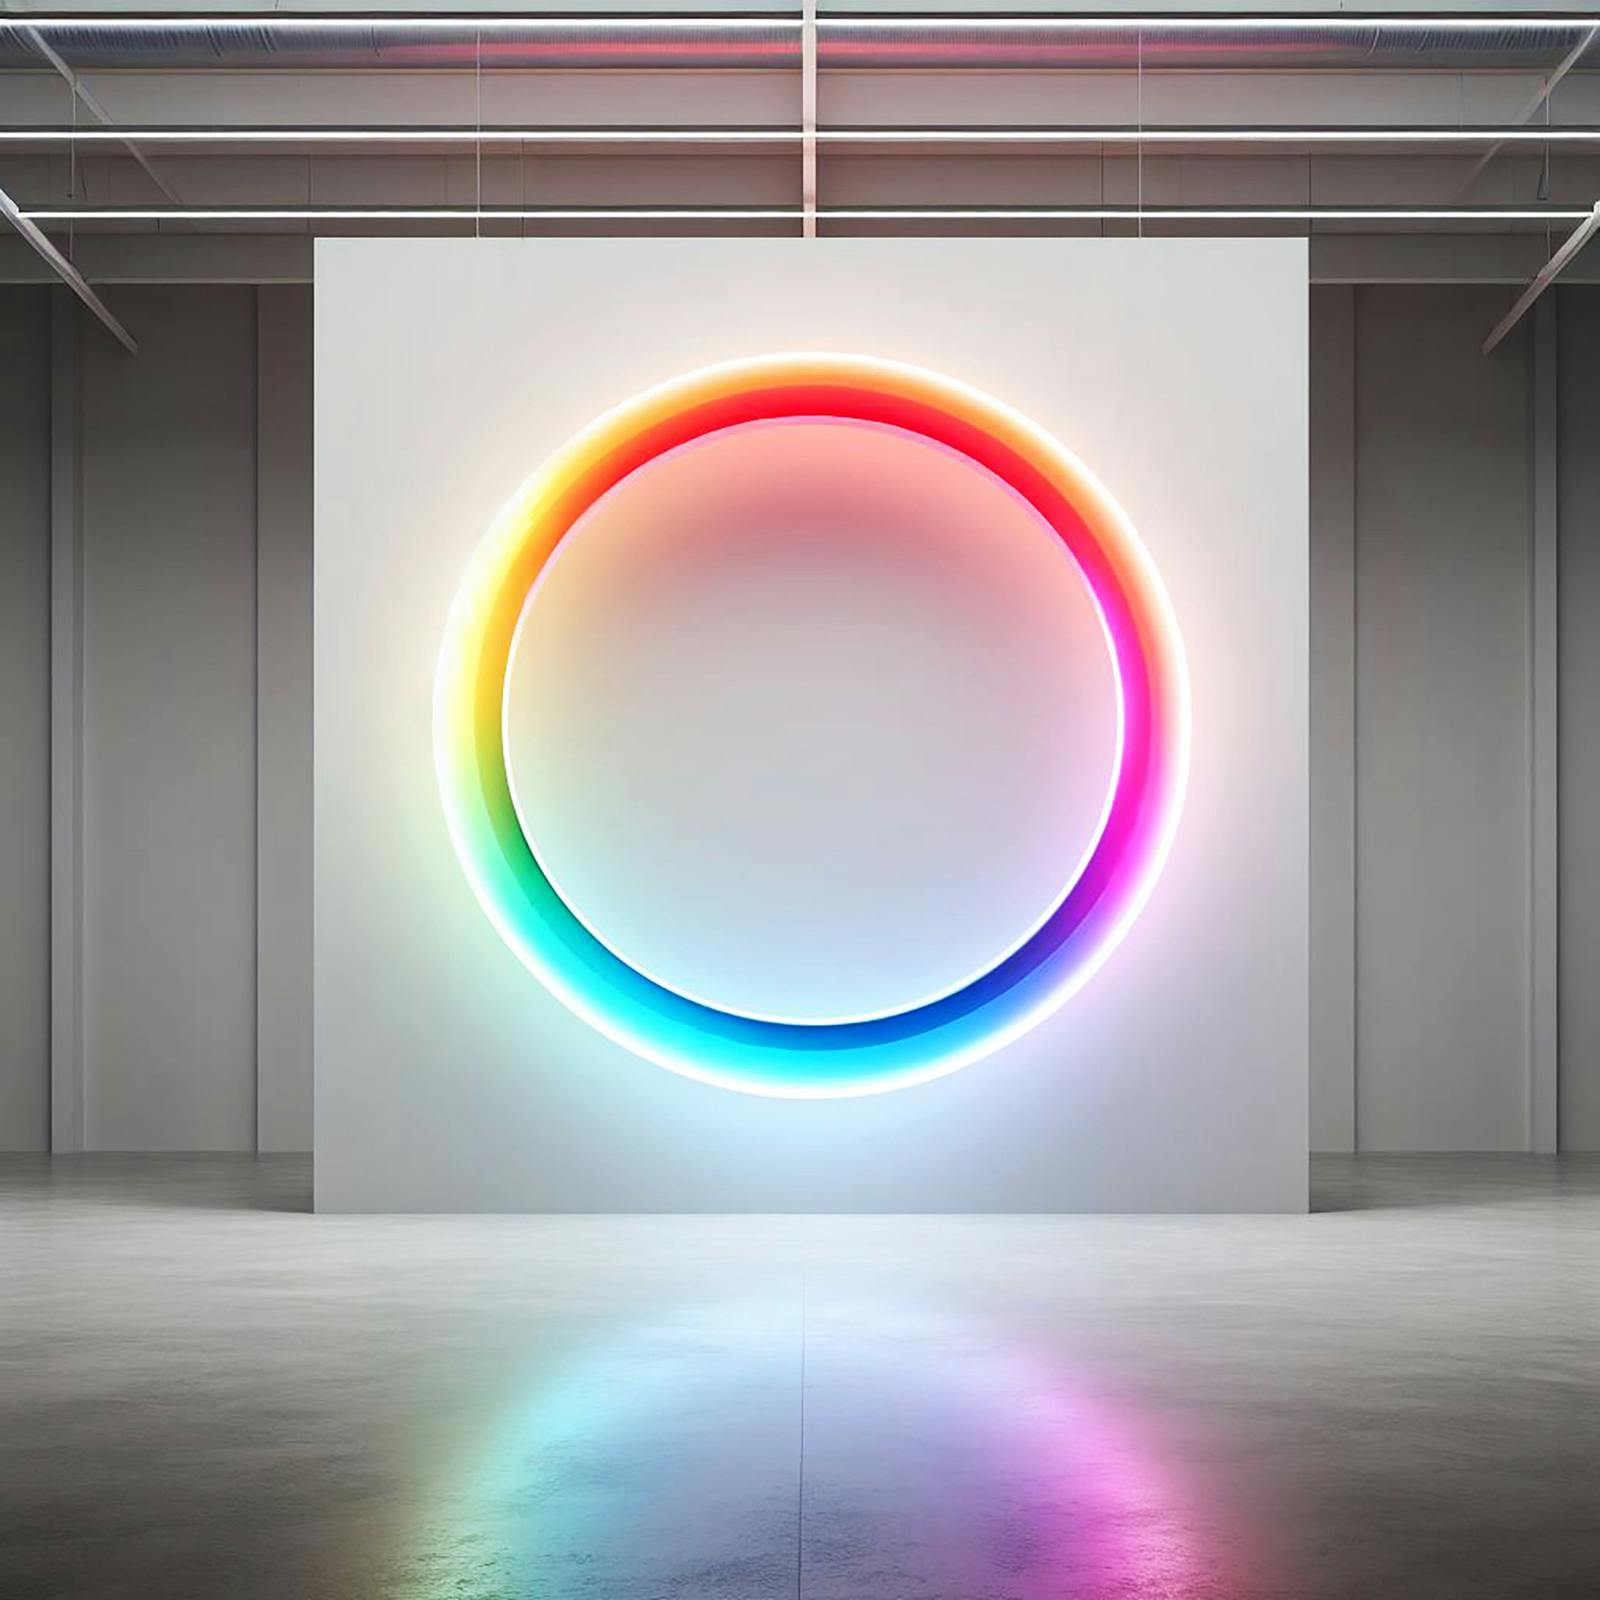 A colored light installation